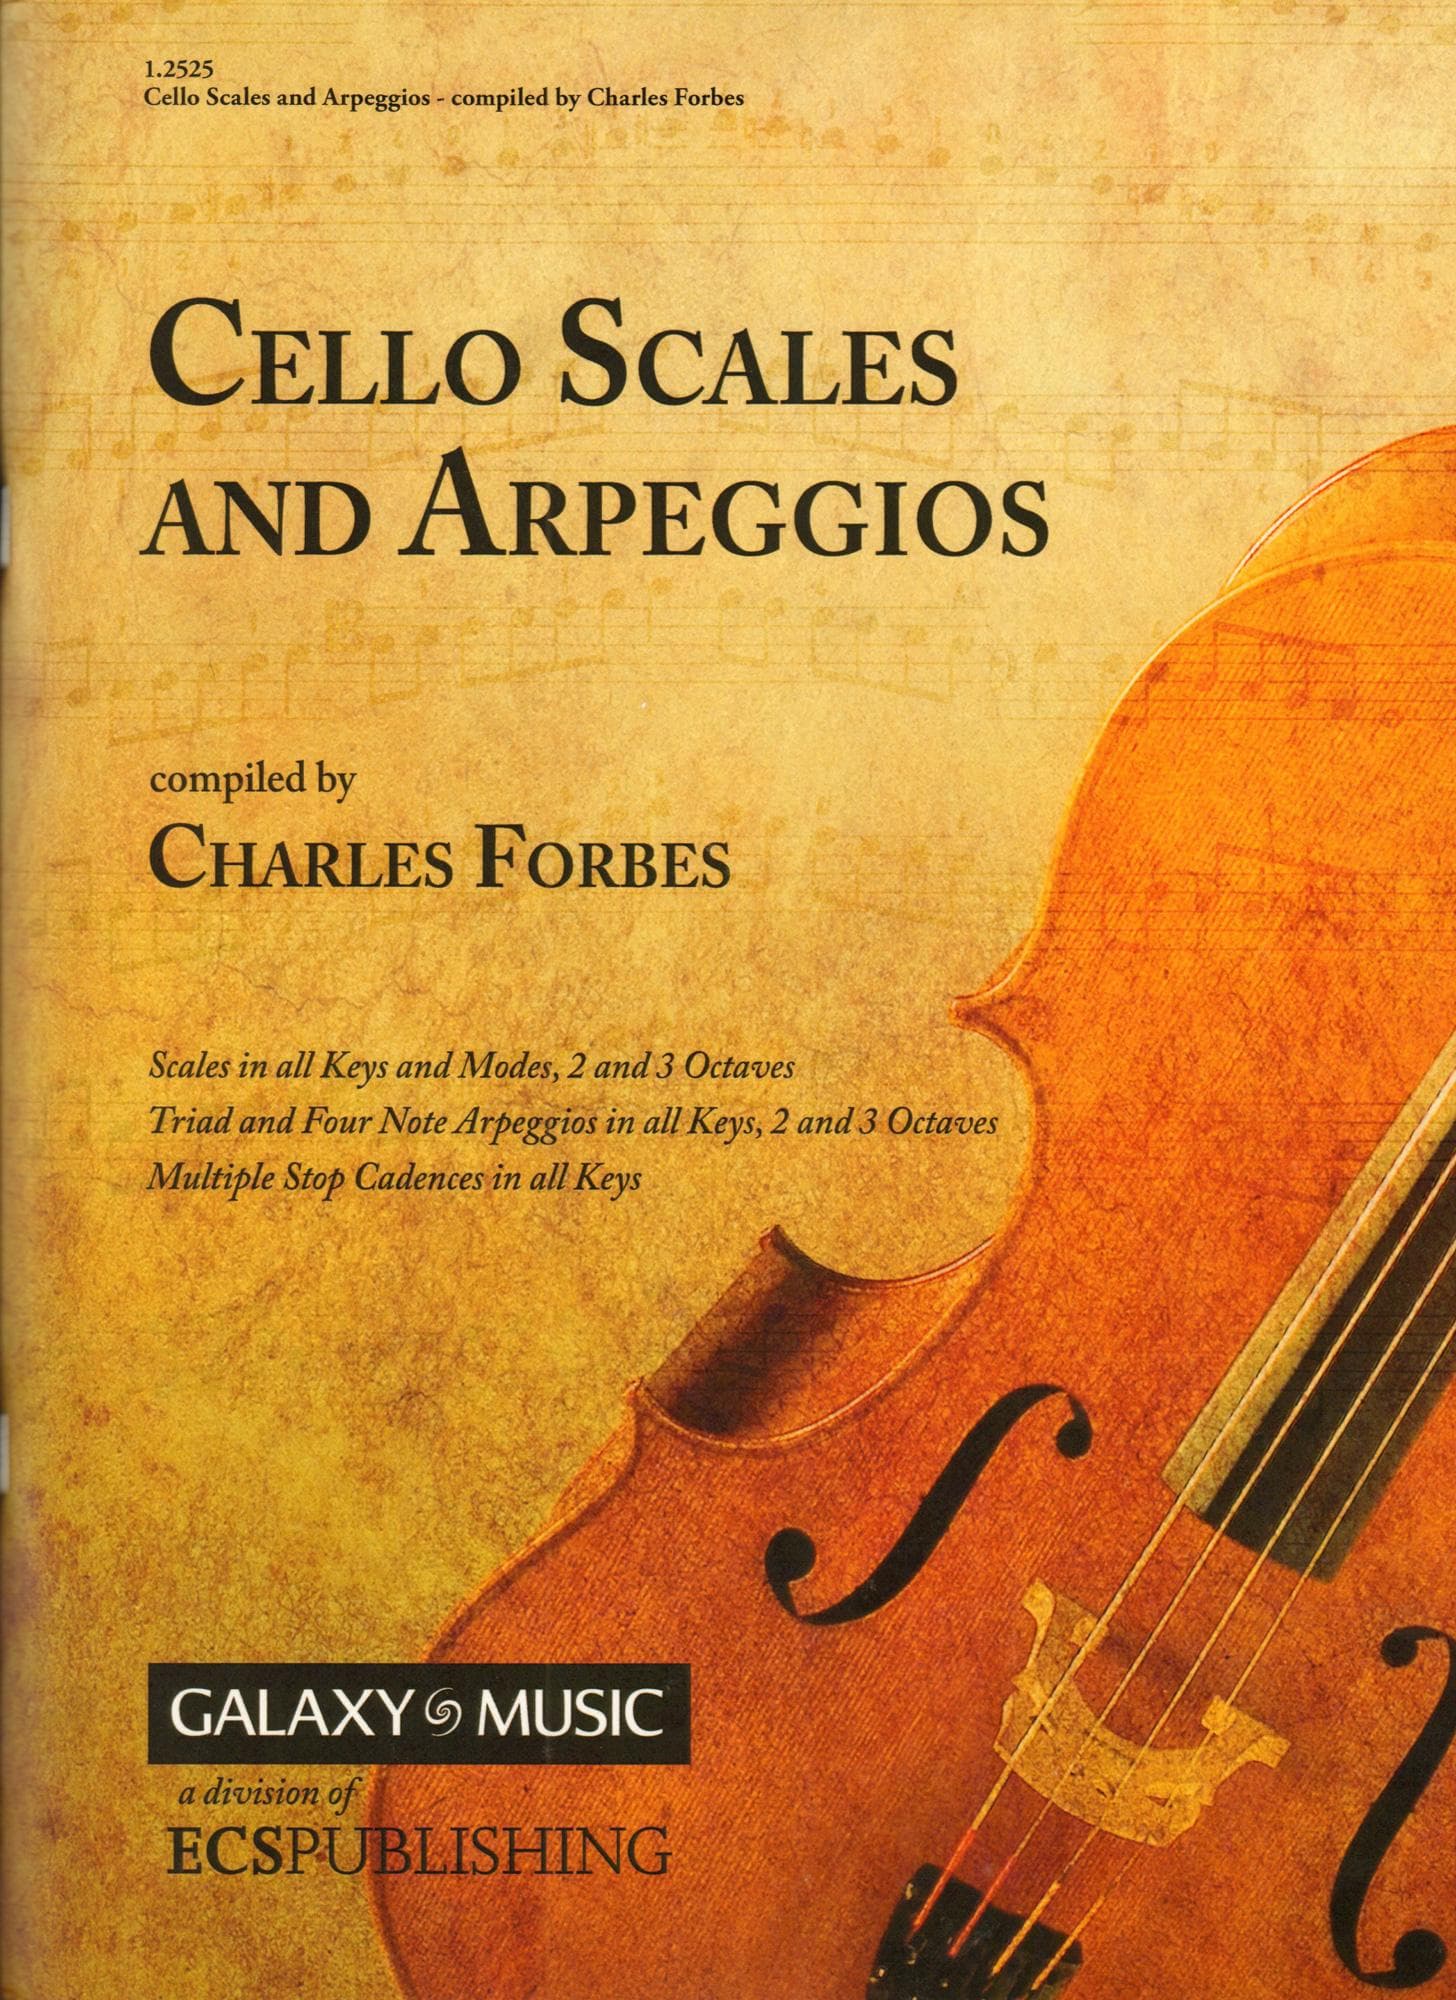 Forbes, Charles - Cello Scales and Arpeggios - Galaxy Music Edition